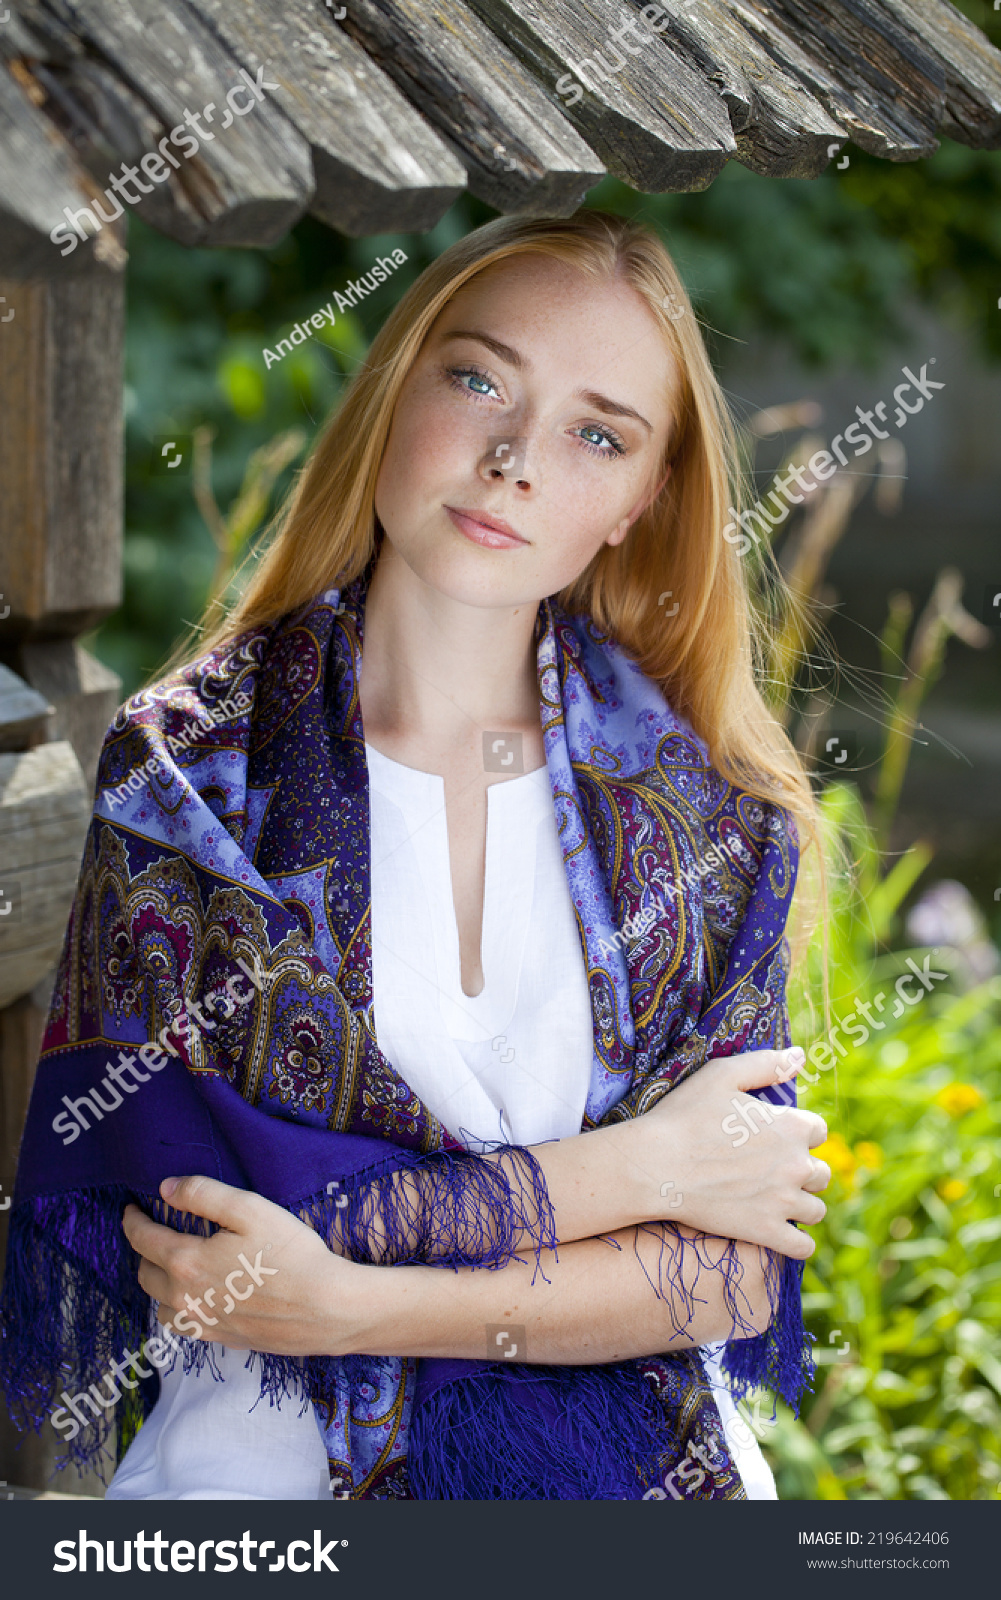 https://image.shutterstock.com/z/stock-photo-russian-beauty-woman-in-the-national-patterned-scarf-219642406.jpg